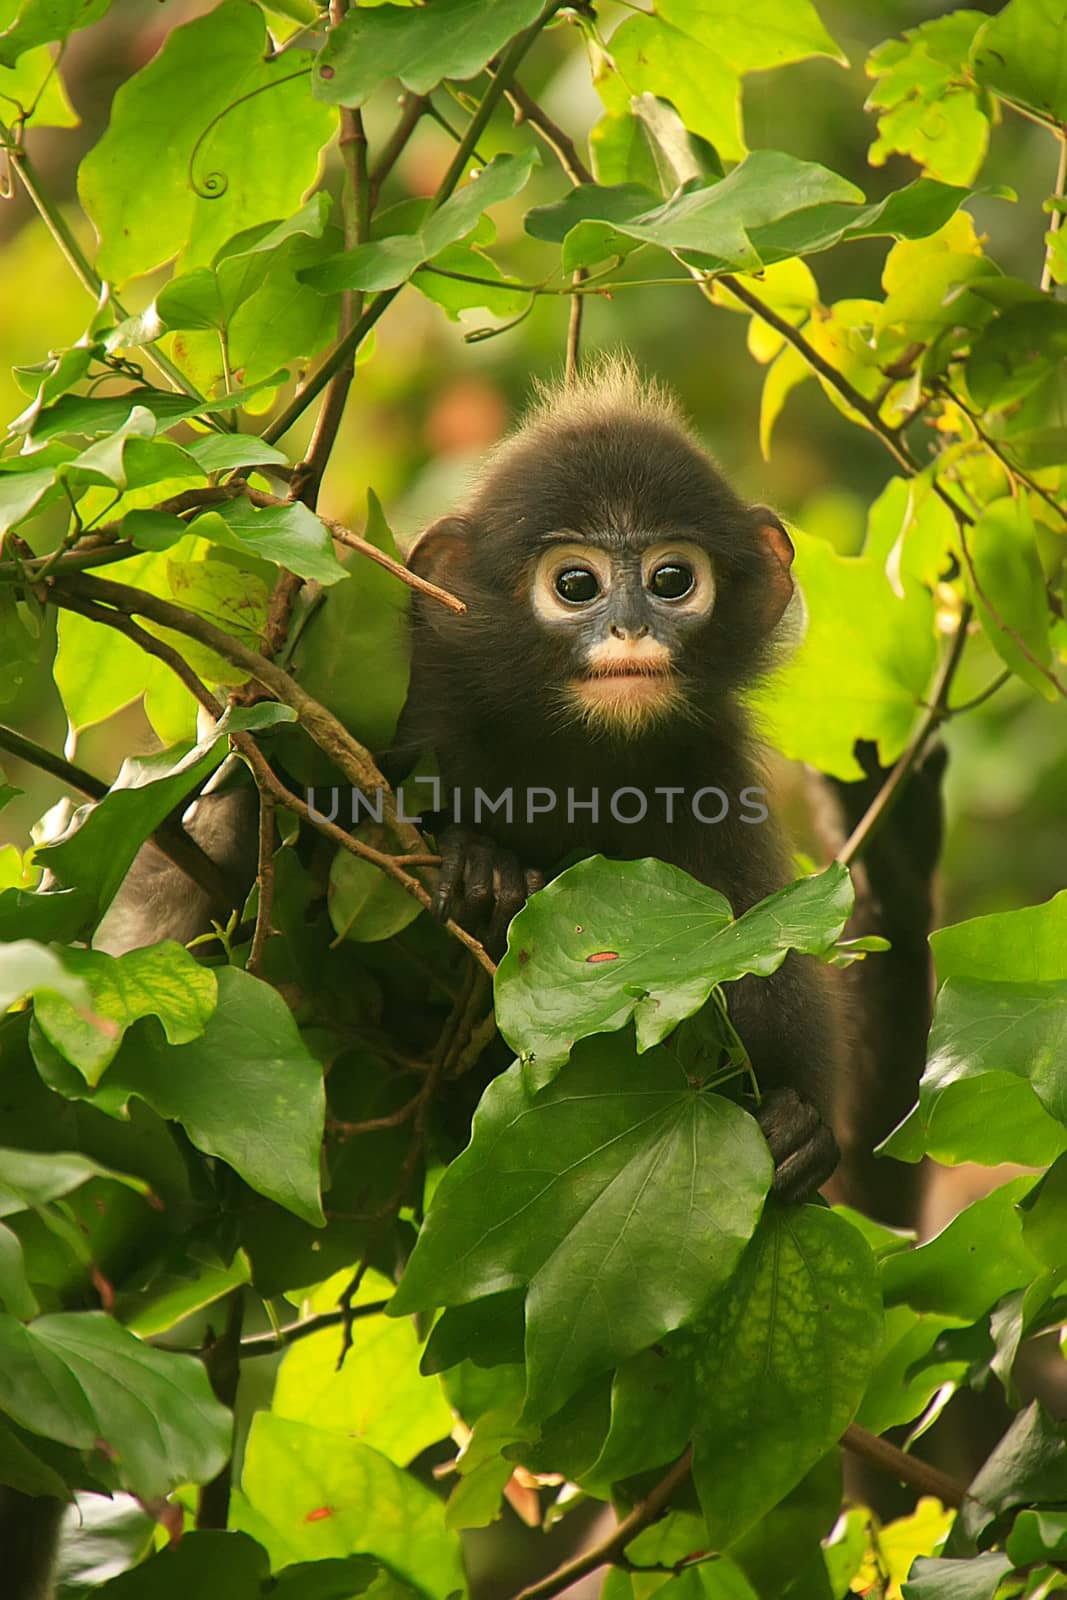 Young Spectacled langur sitting in a tree, Wua Talap island, Ang Thong National Marine Park, Thailand